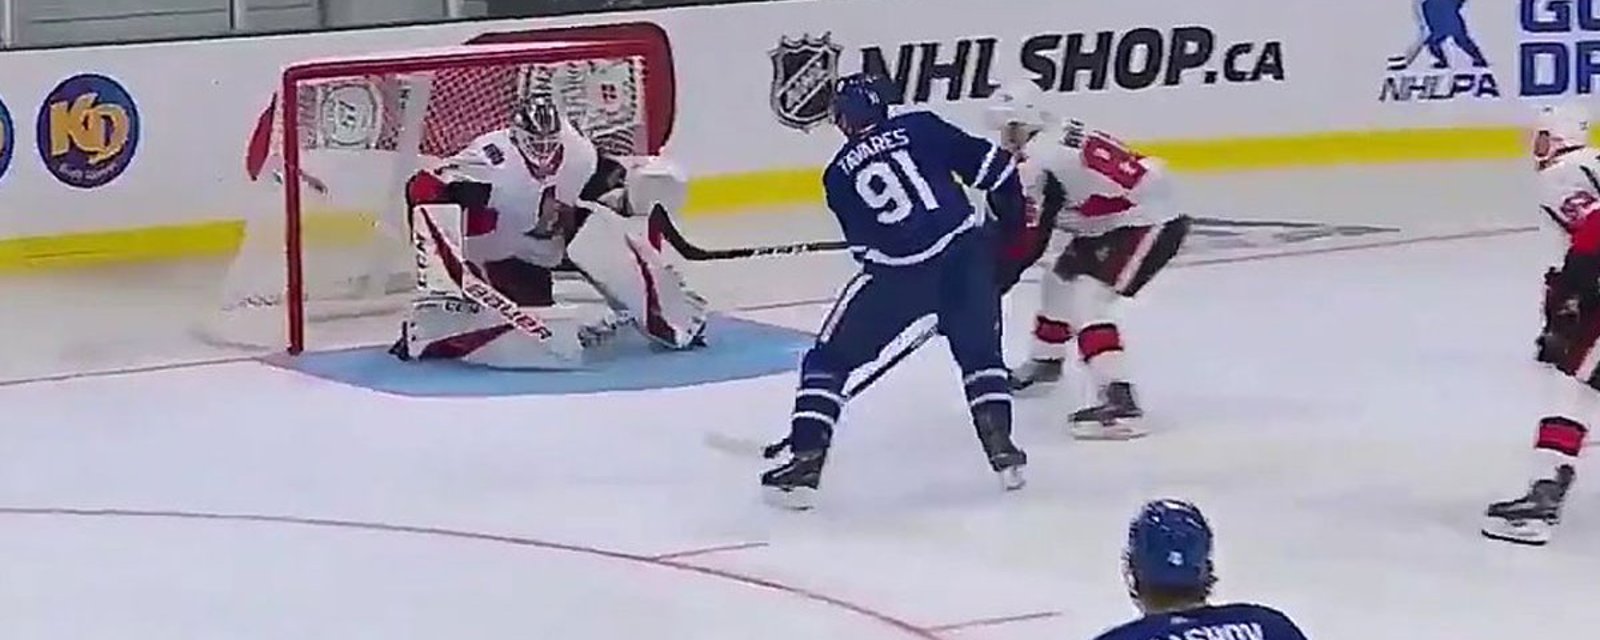 Breaking: Tavares scores his first goal as a Leaf! 